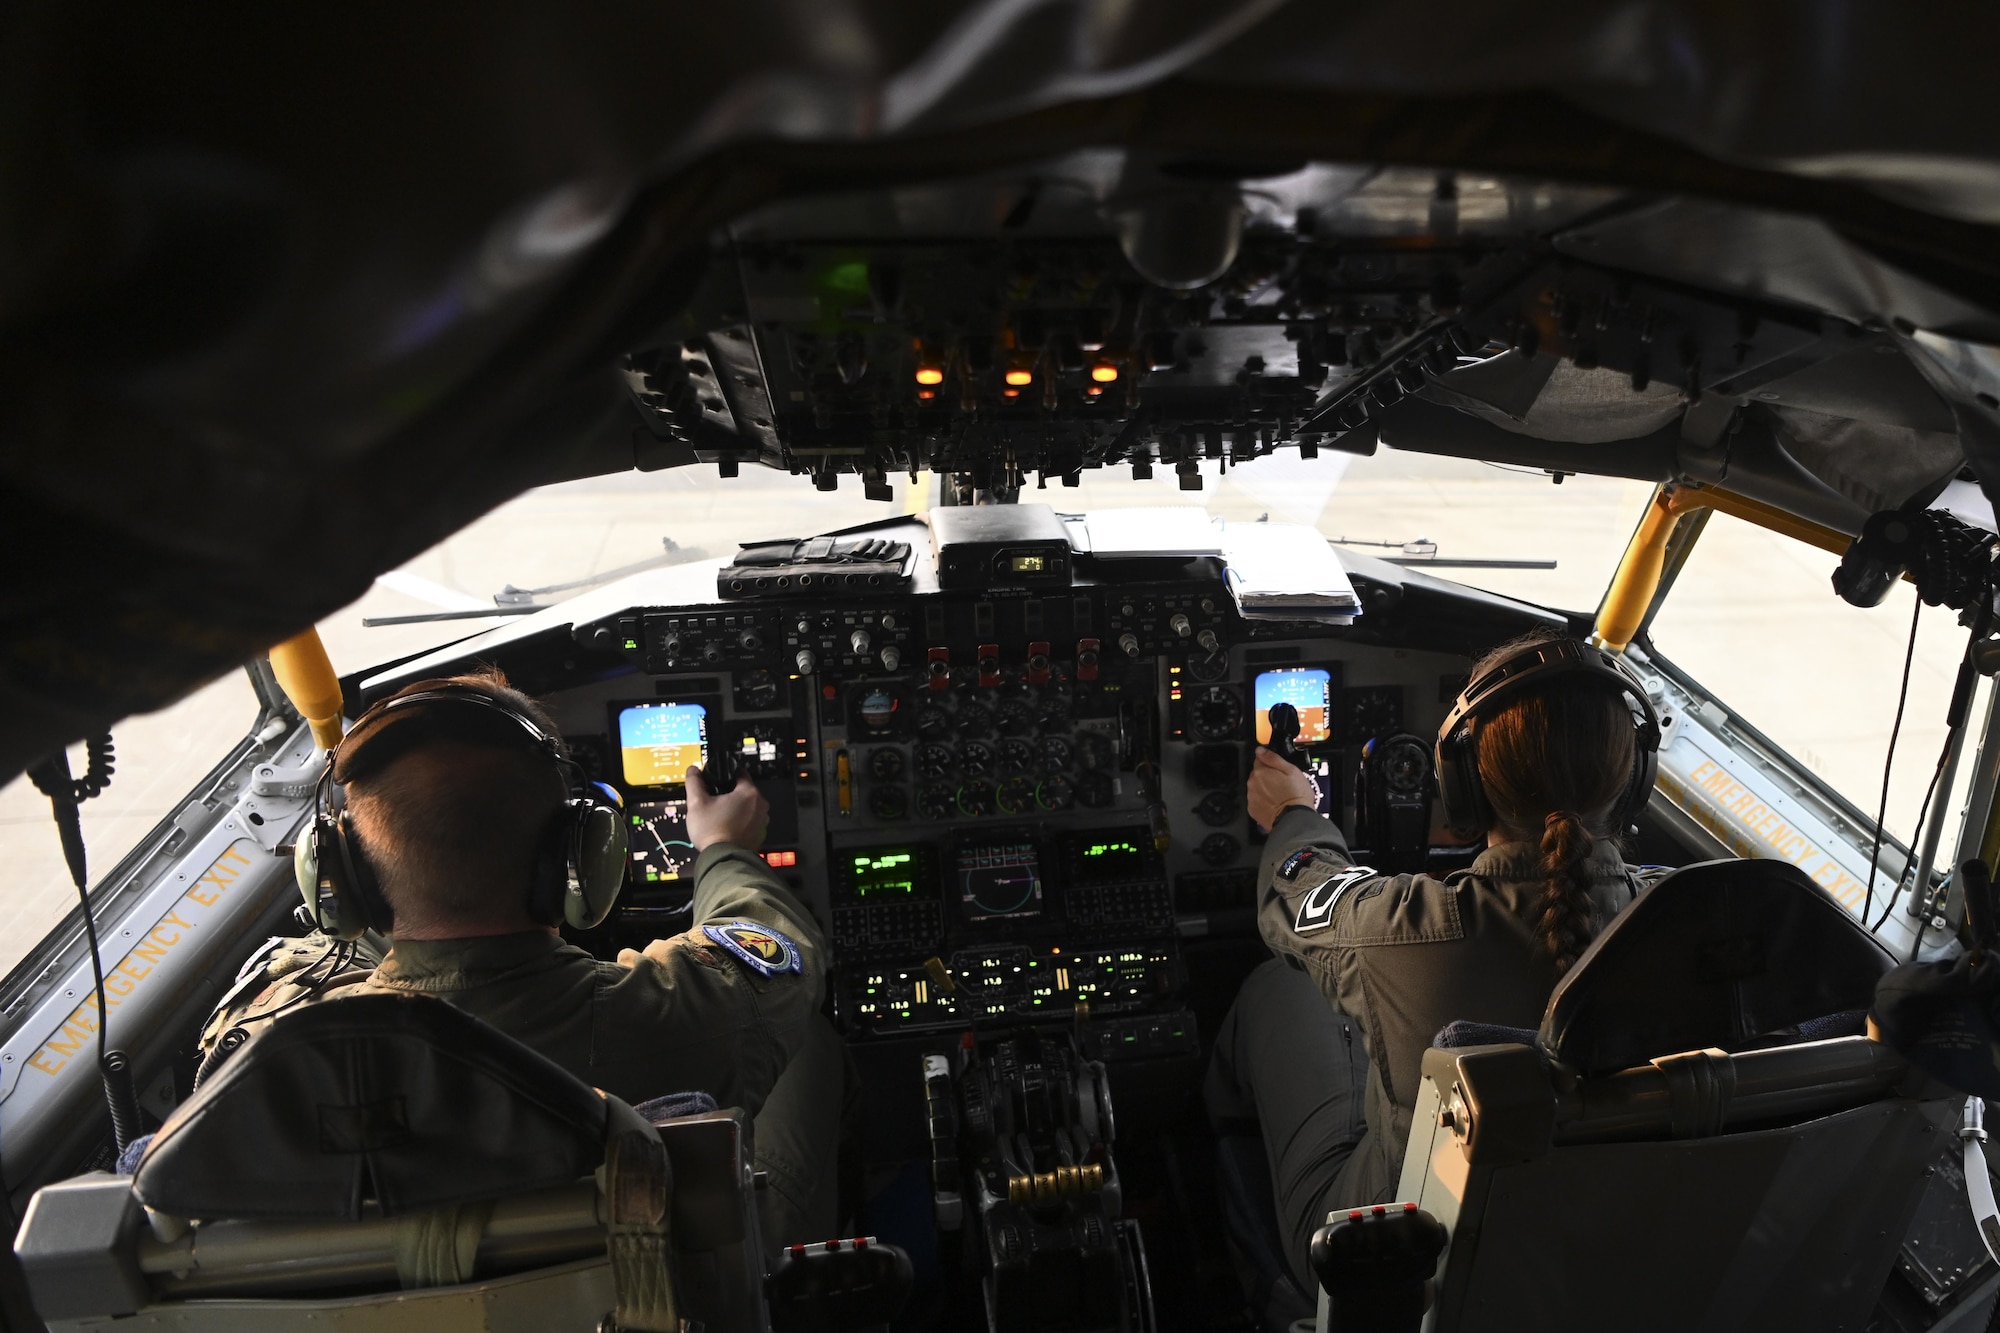 U.S. Air Force Maj. Grant Starkweather, 351st Air Refueling Squadron pilot, left, and Capt. Lindsey Summerlin, 351st ARS pilot, perform preflight checks on a KC-135 Stratotanker aircraft before a flight at Royal Air Force Mildenhall, England, Aug. 2, 2021. The aerial refueling capabilities of the 100th ARW’s KC-135s extend the range of U.S., allied and partner-nation fighter aircraft. (U.S. Air Force photo by Senior Airman Joseph Barron)